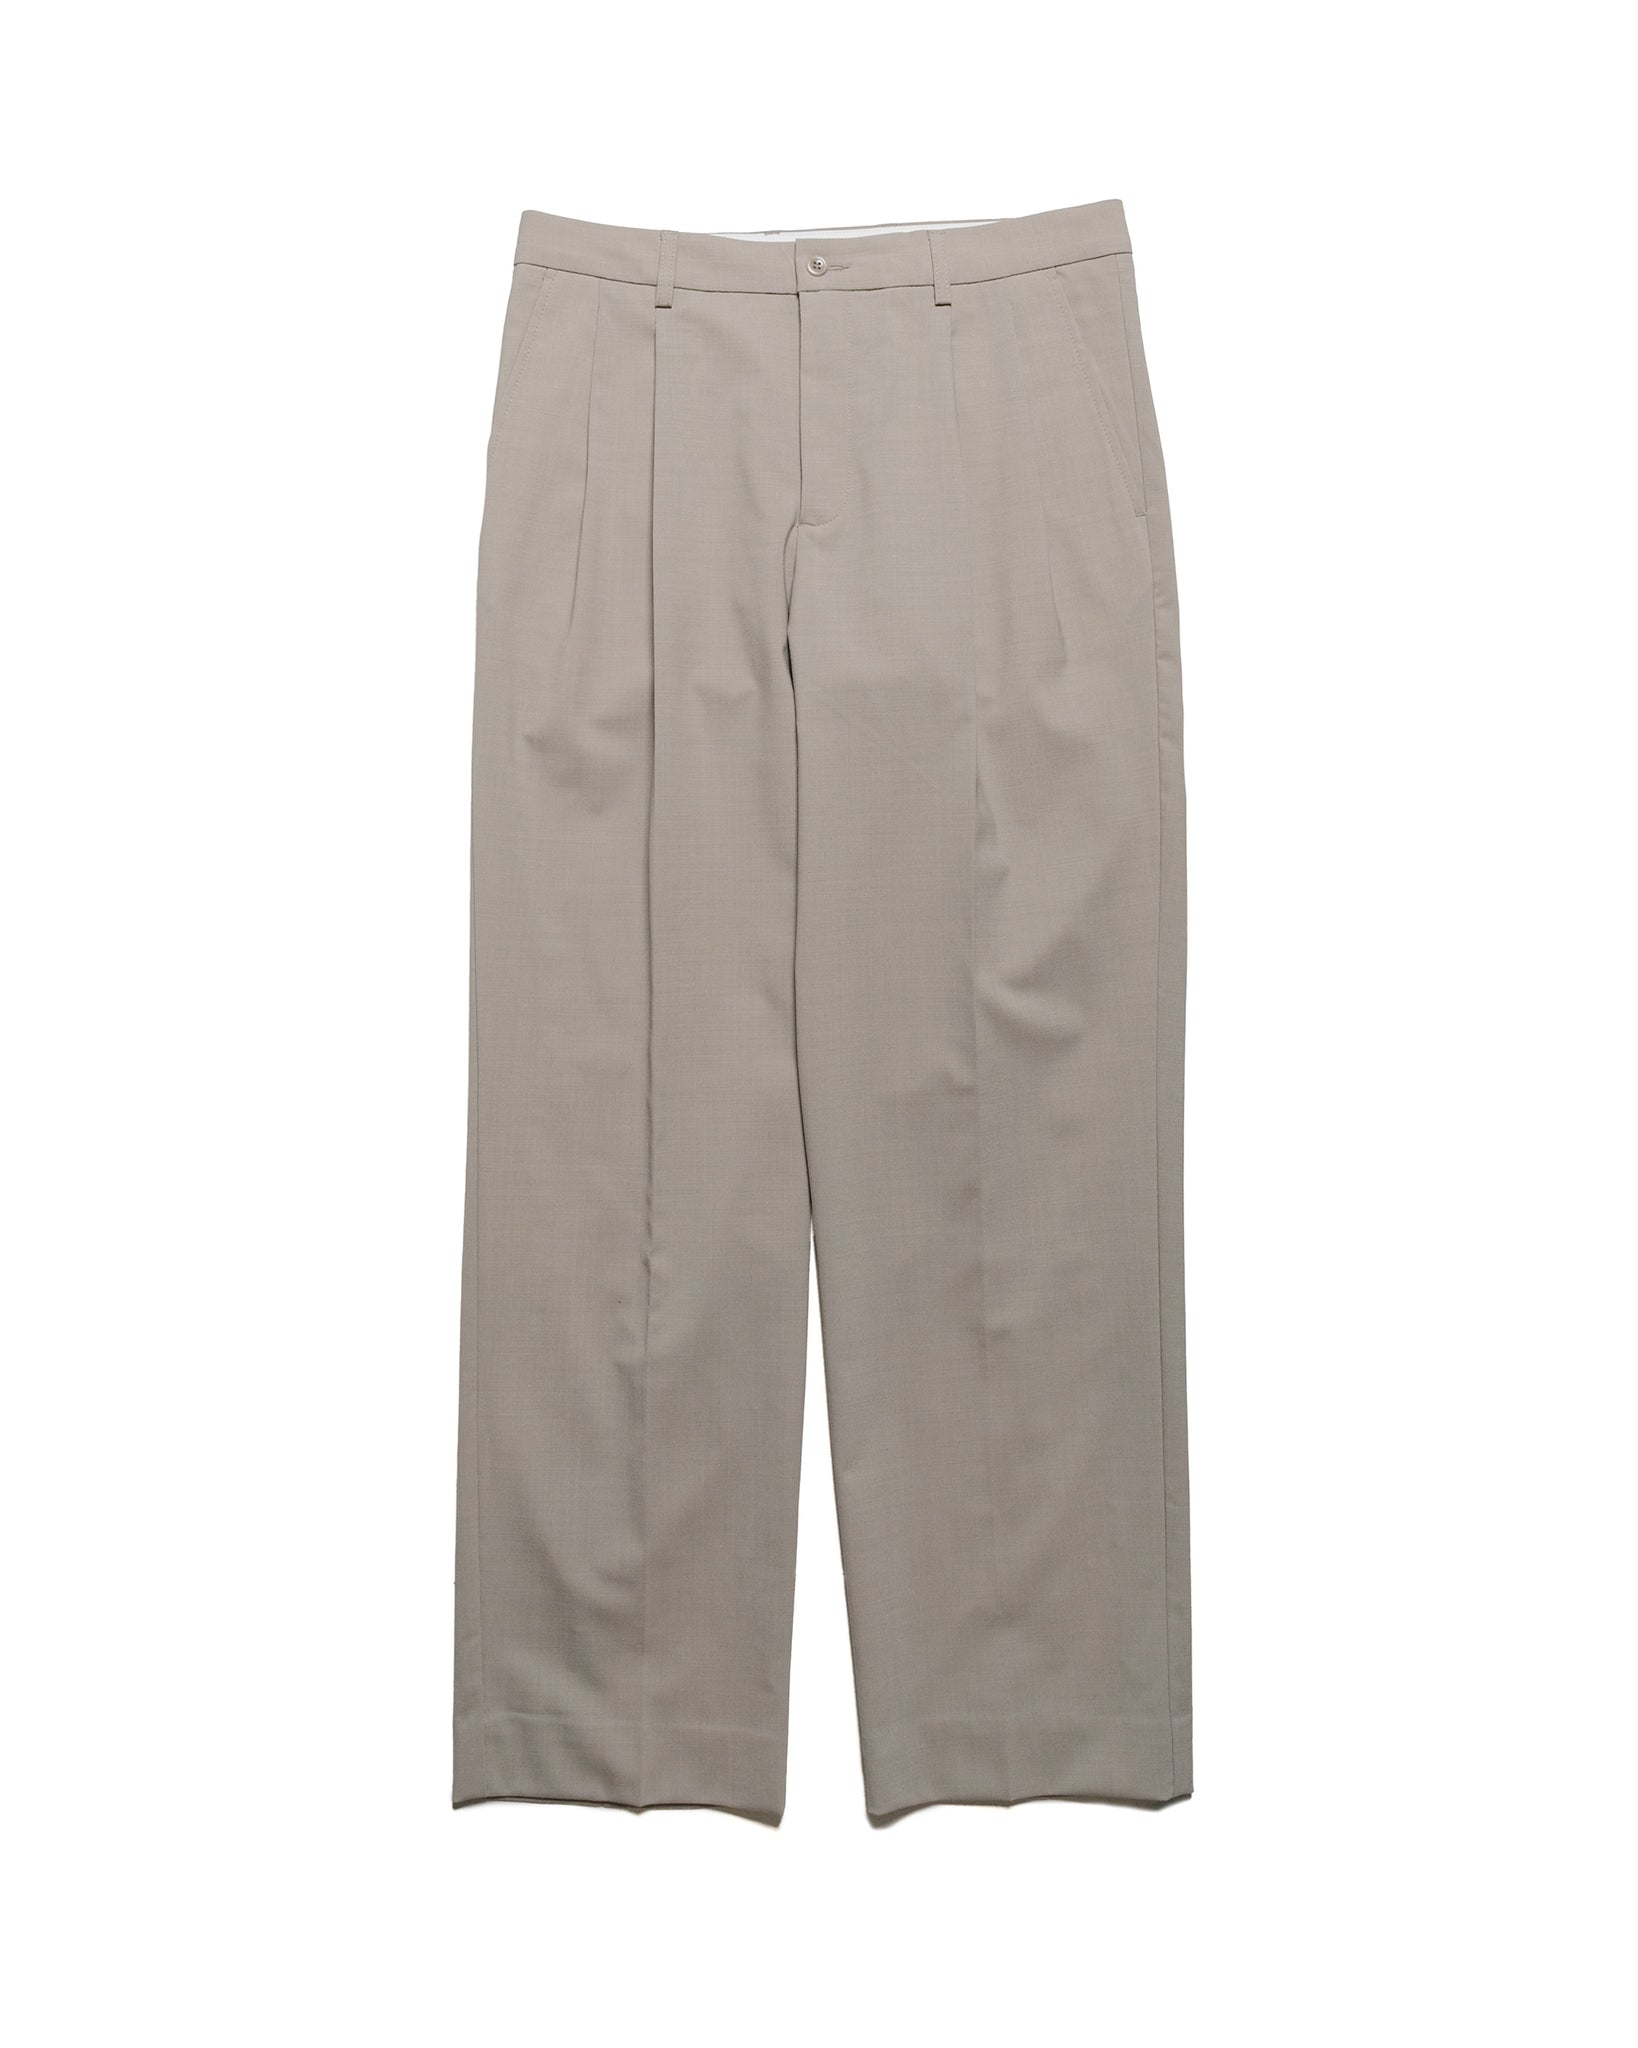 Norse Projects Benn Relaxed Light Wool Pleated Trouser Light Khaki 